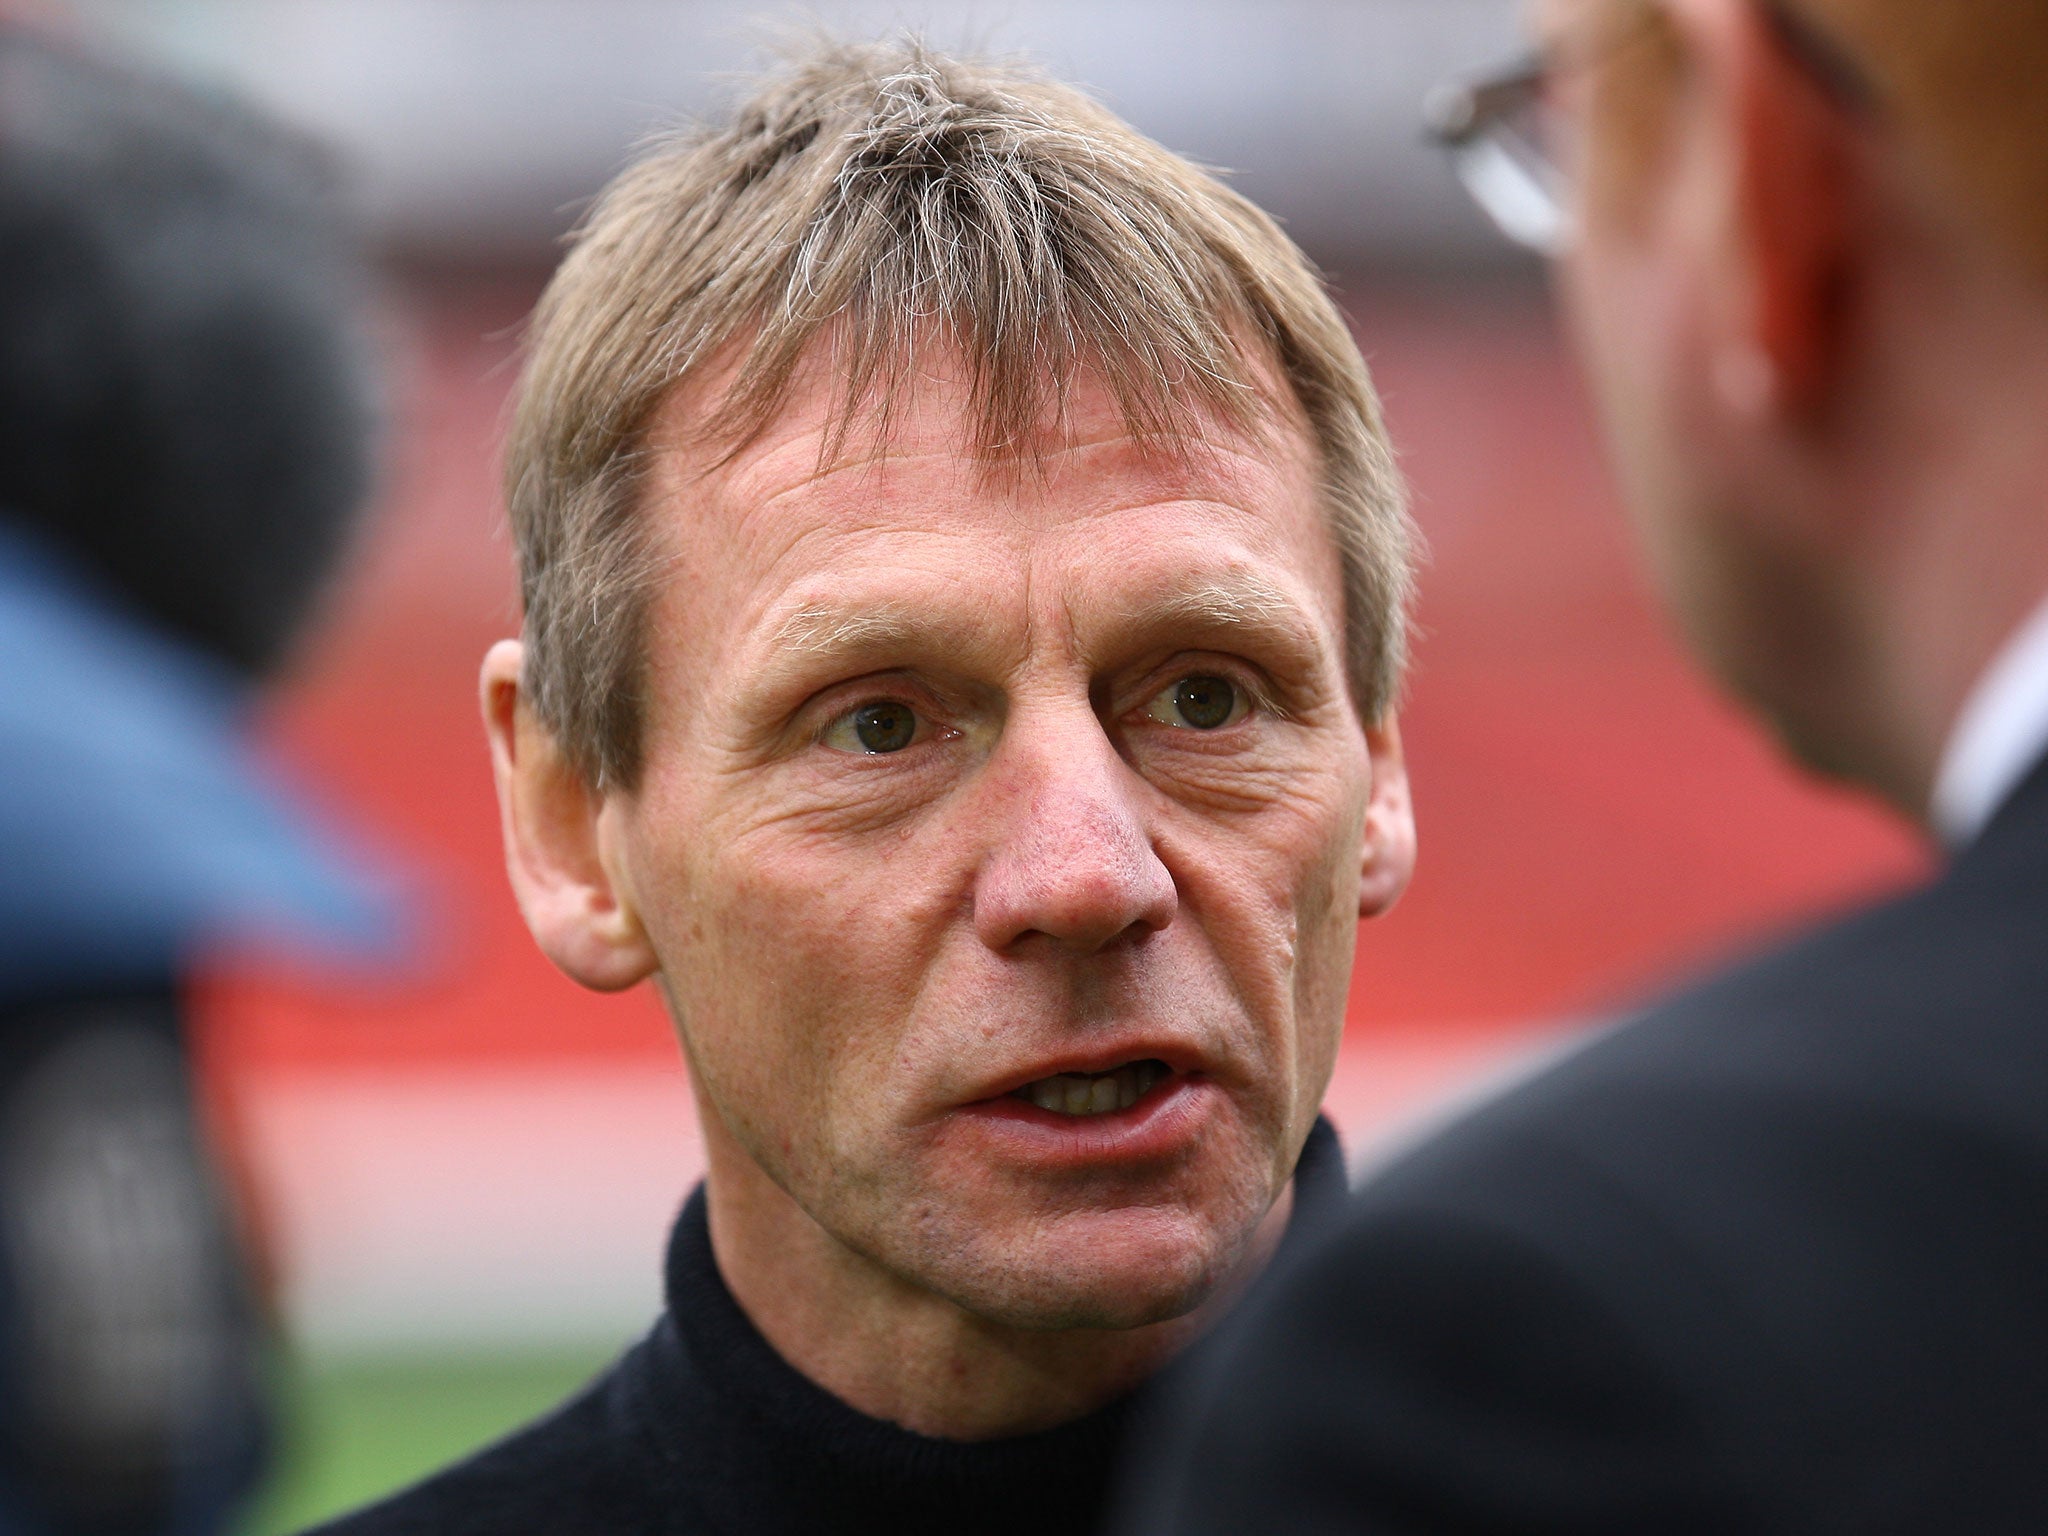 Stuart Pearce is interviewed pitch side after being unveiled as the new Nottingham Forest Manager at the City Ground